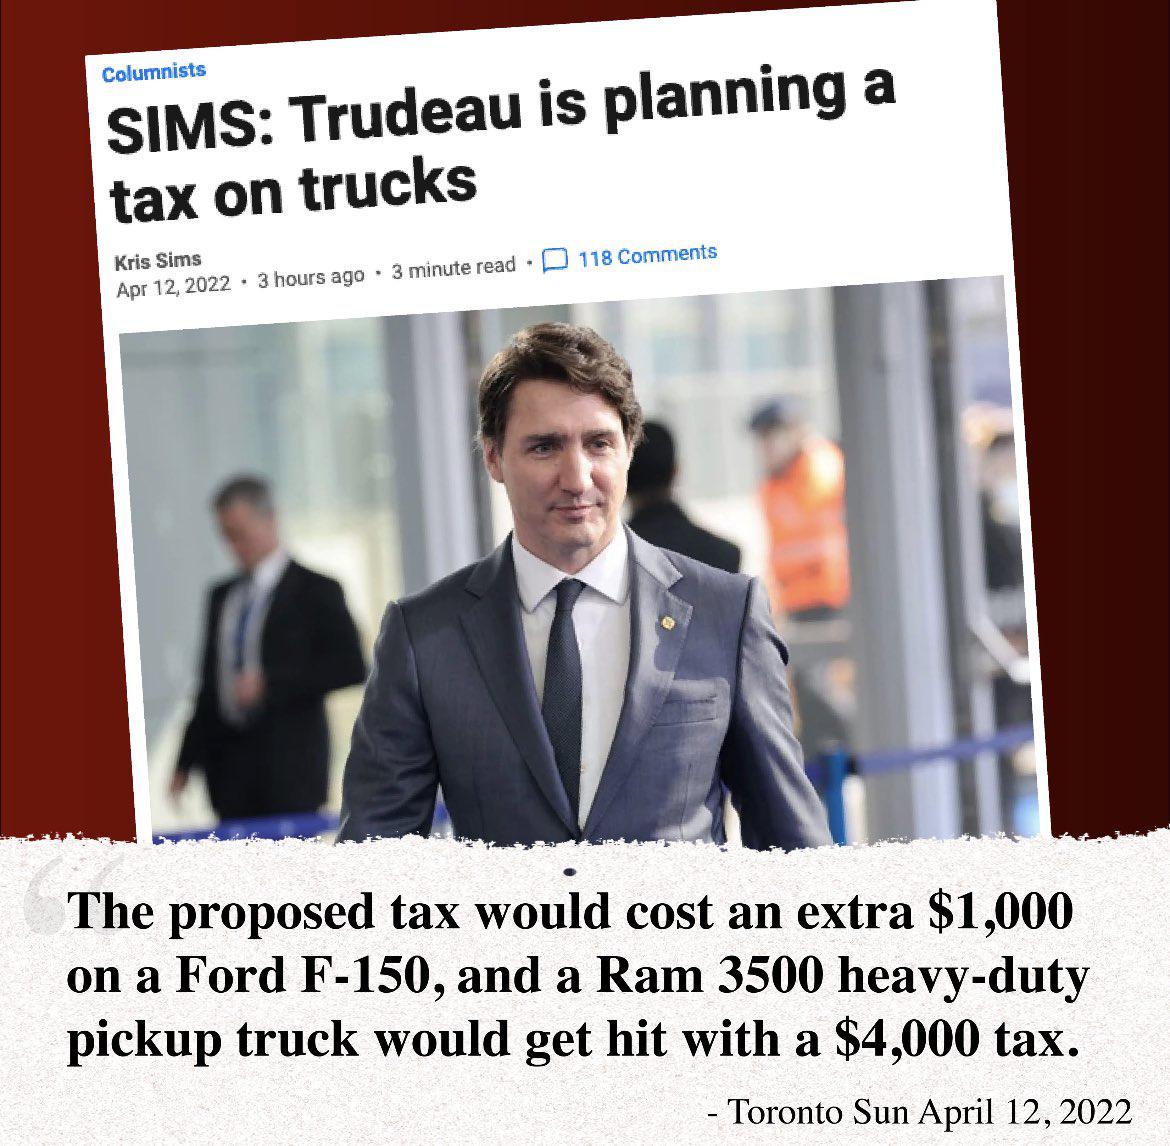 SIMS: Trudeau is planning a tax on trucks 